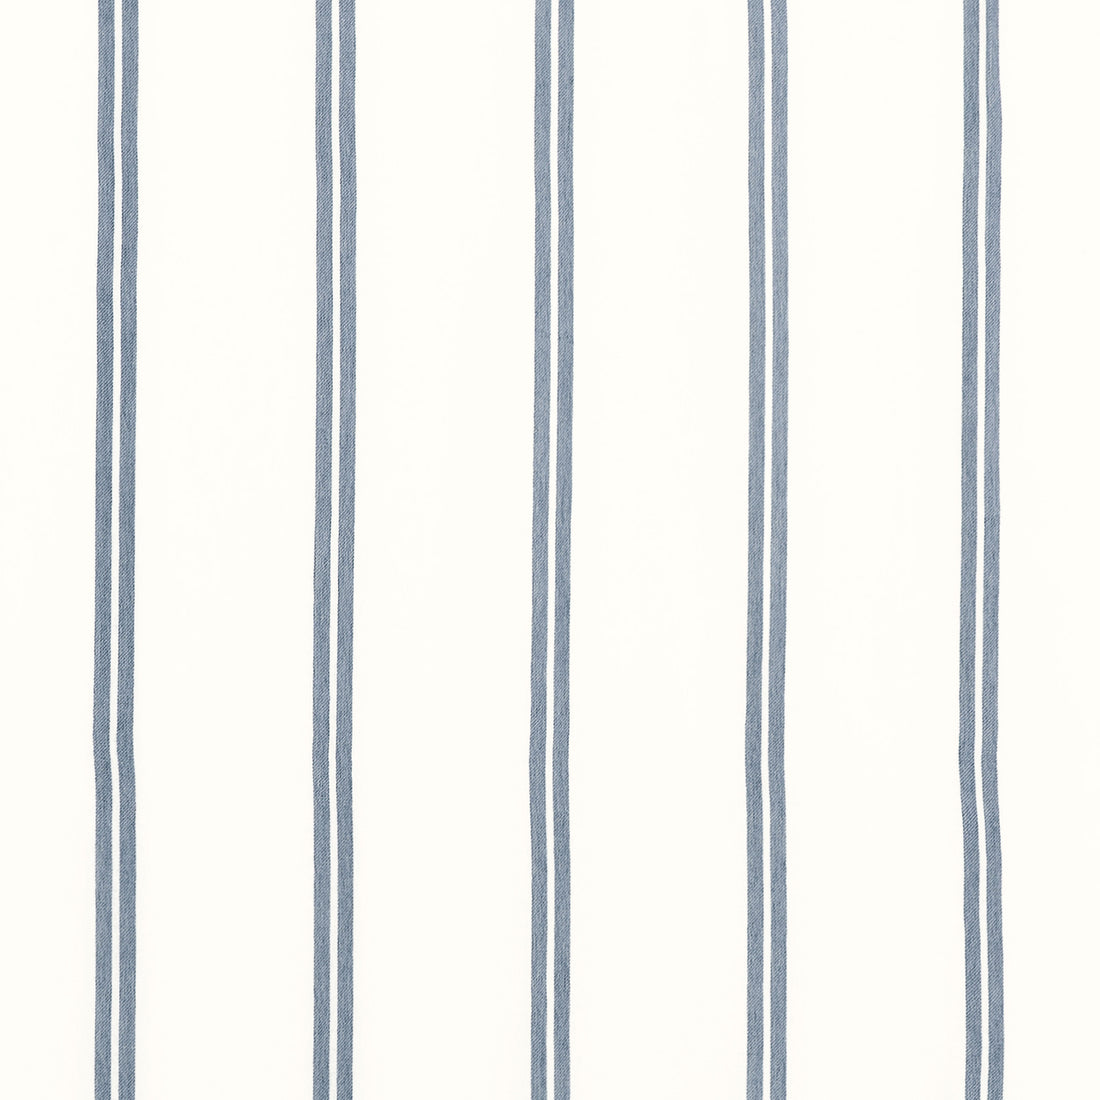 Tandern Stripe fabric in oxford blue color - pattern number FWW81749 - by Thibaut in the Locale Wide Width collection